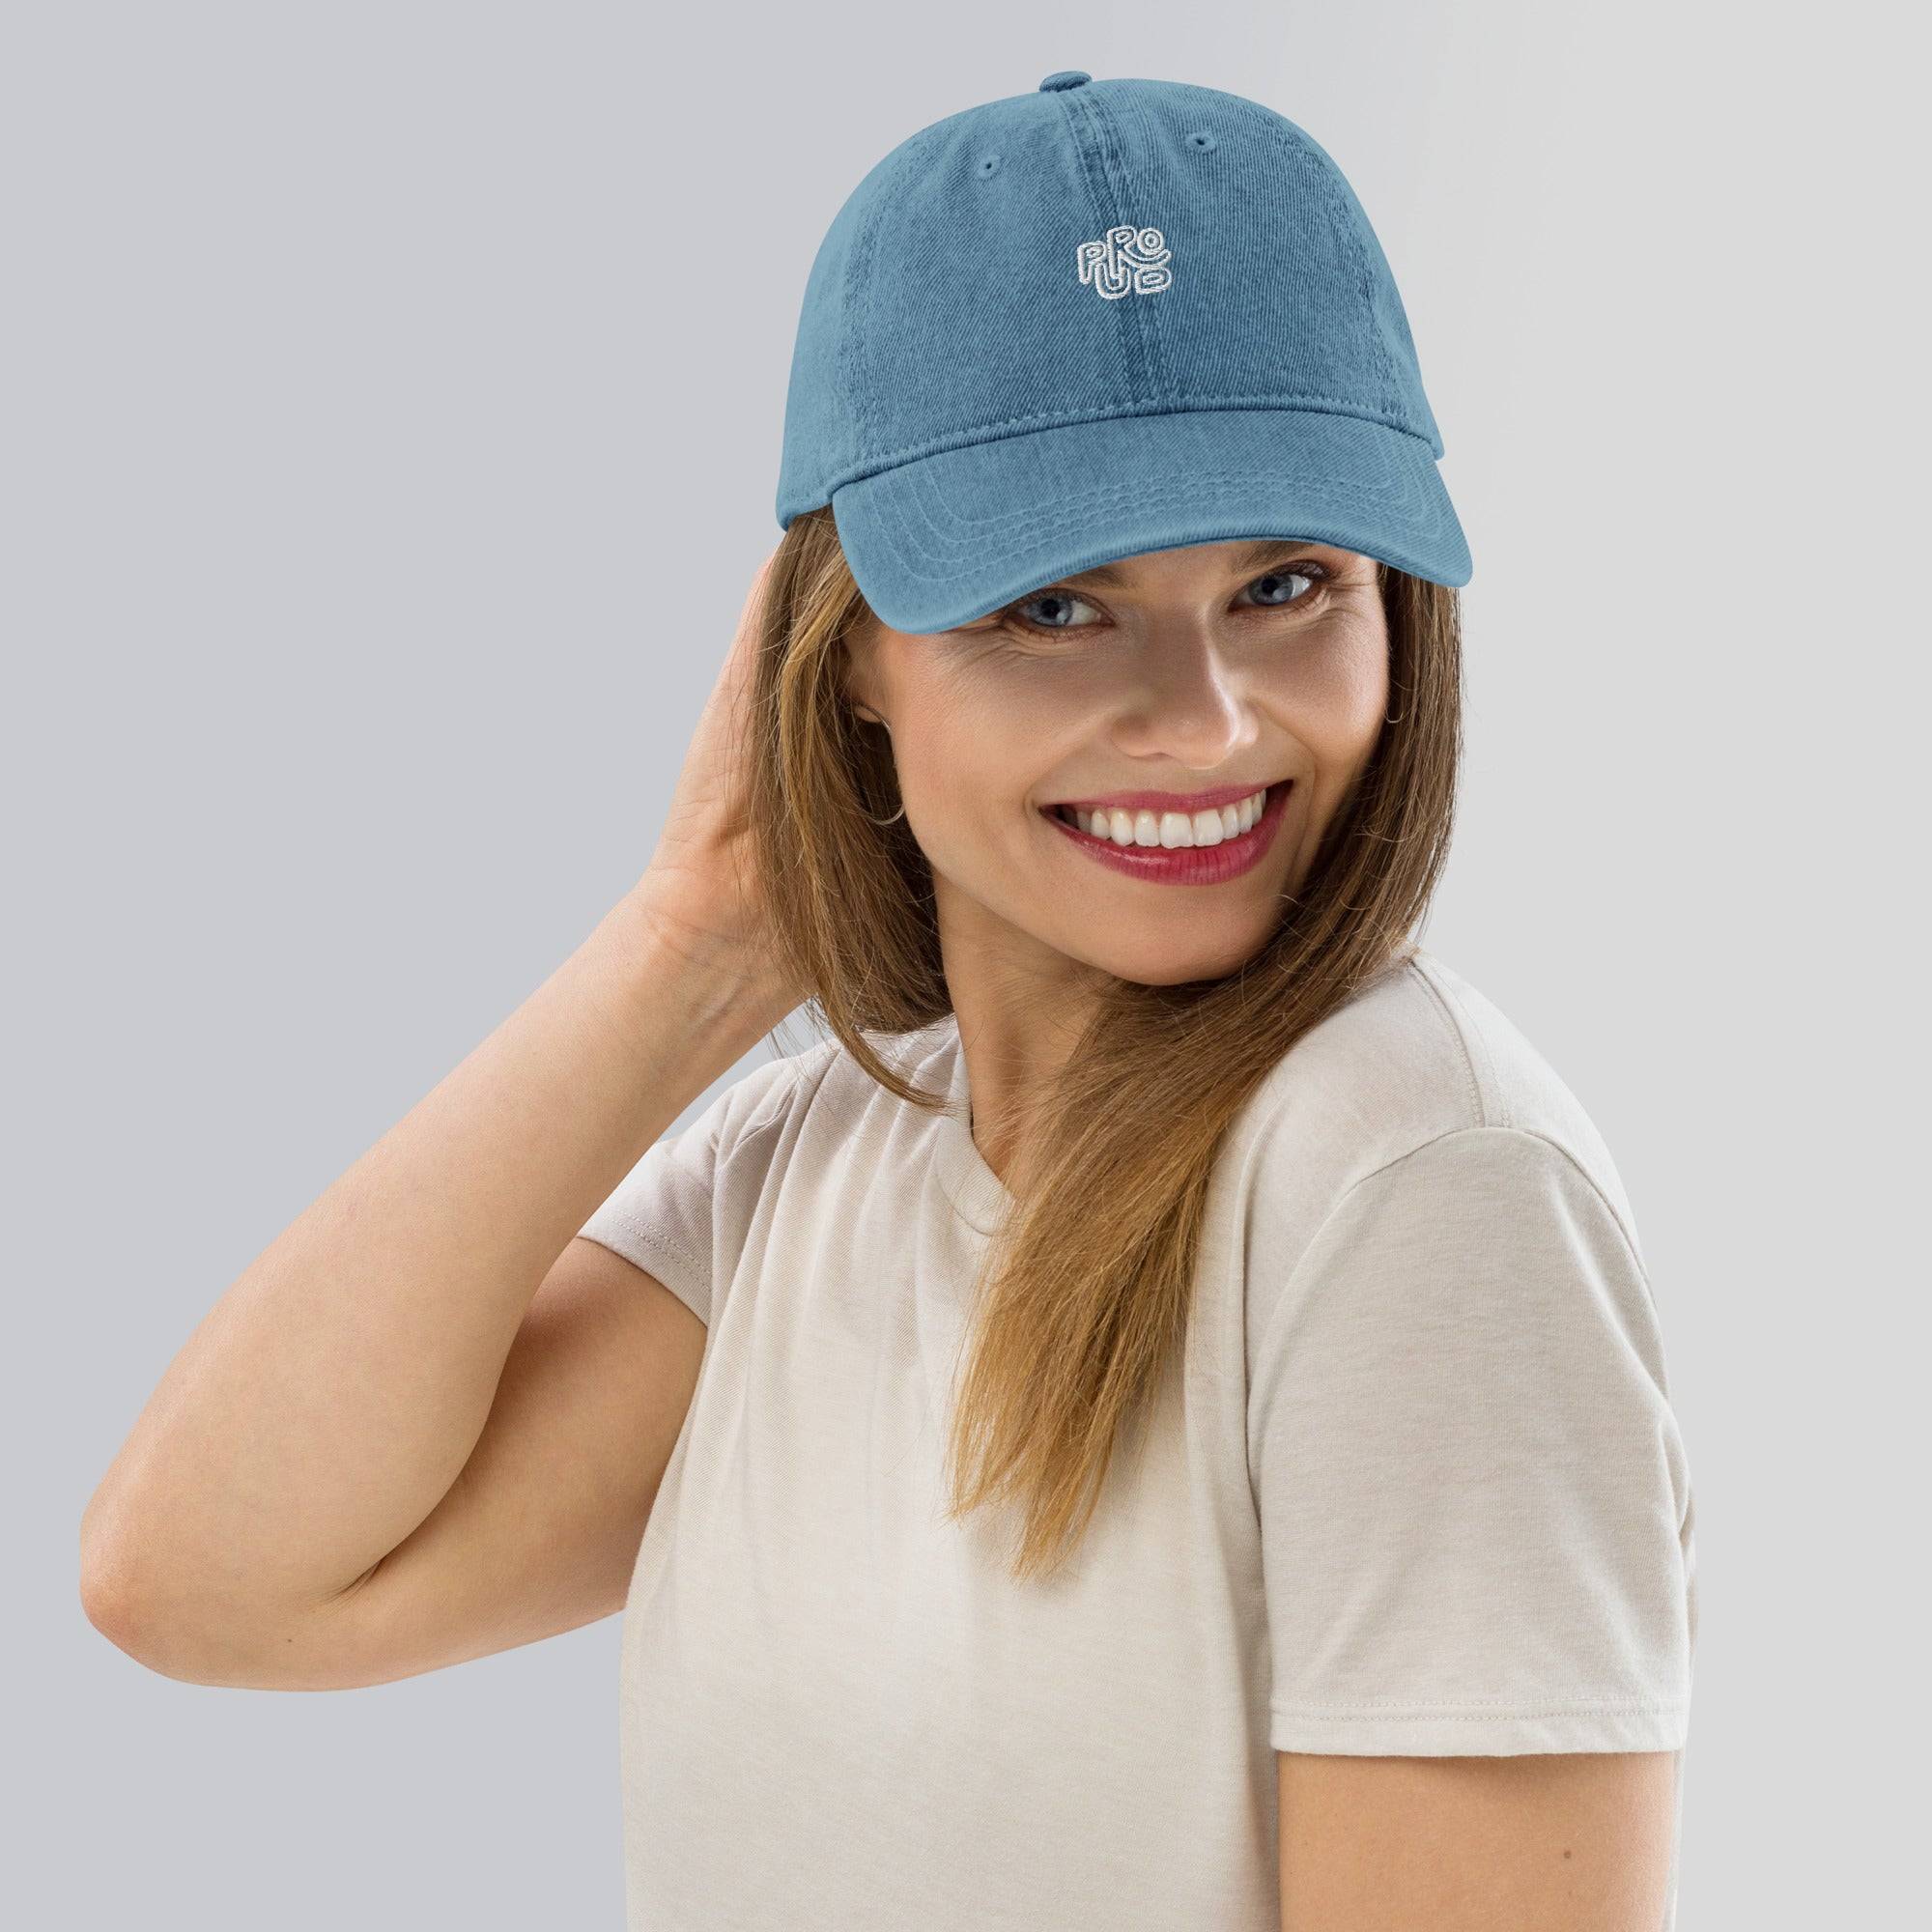 Denim Caps - Revive Wear     Ladies' Denim Cap. Timeless as your favorite pair of jeans. This pigment-dyed denim cap with an adjustable strap lets you find your perfect fit. Available now.